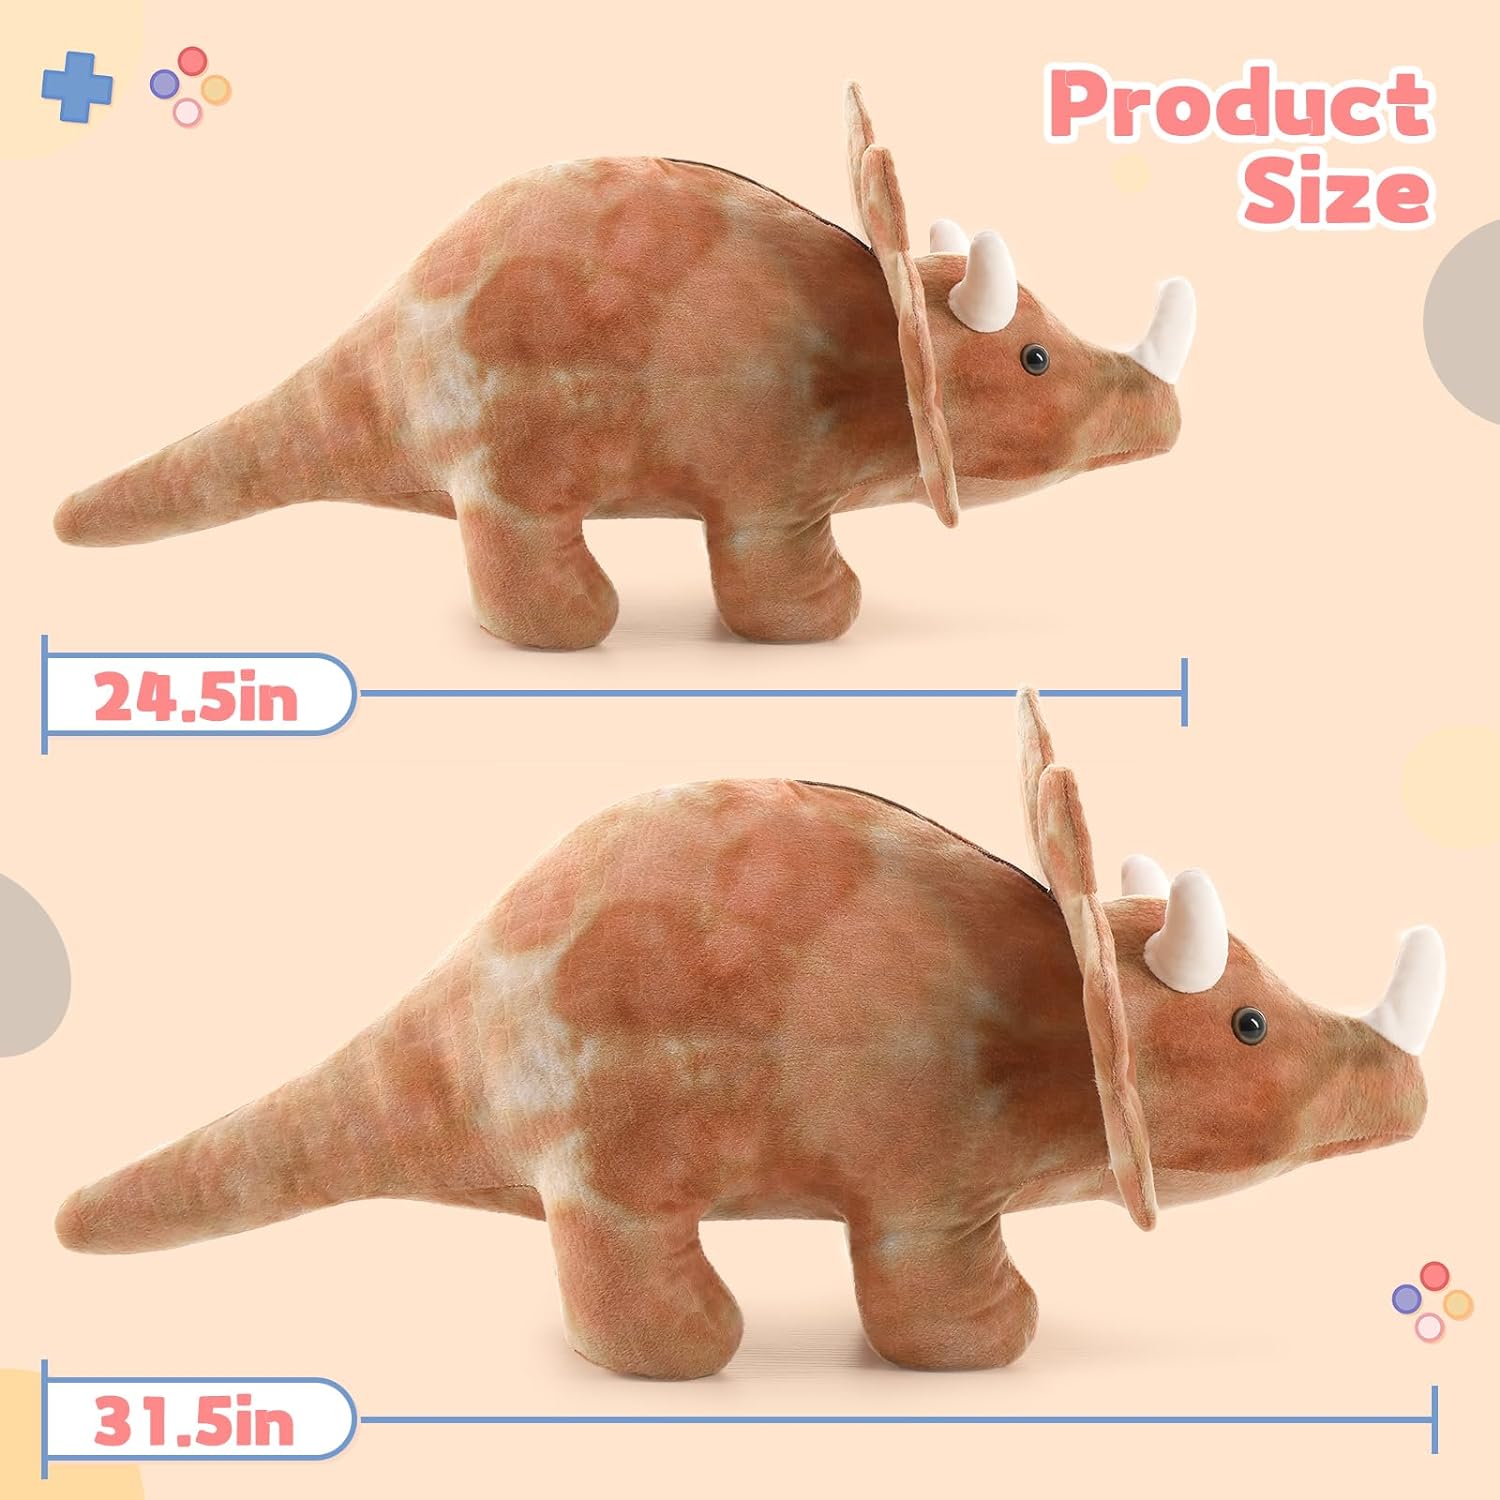 Dinosaur Plush Toy Triceratops Stuffed Toy, 24.5/31.5 Inches